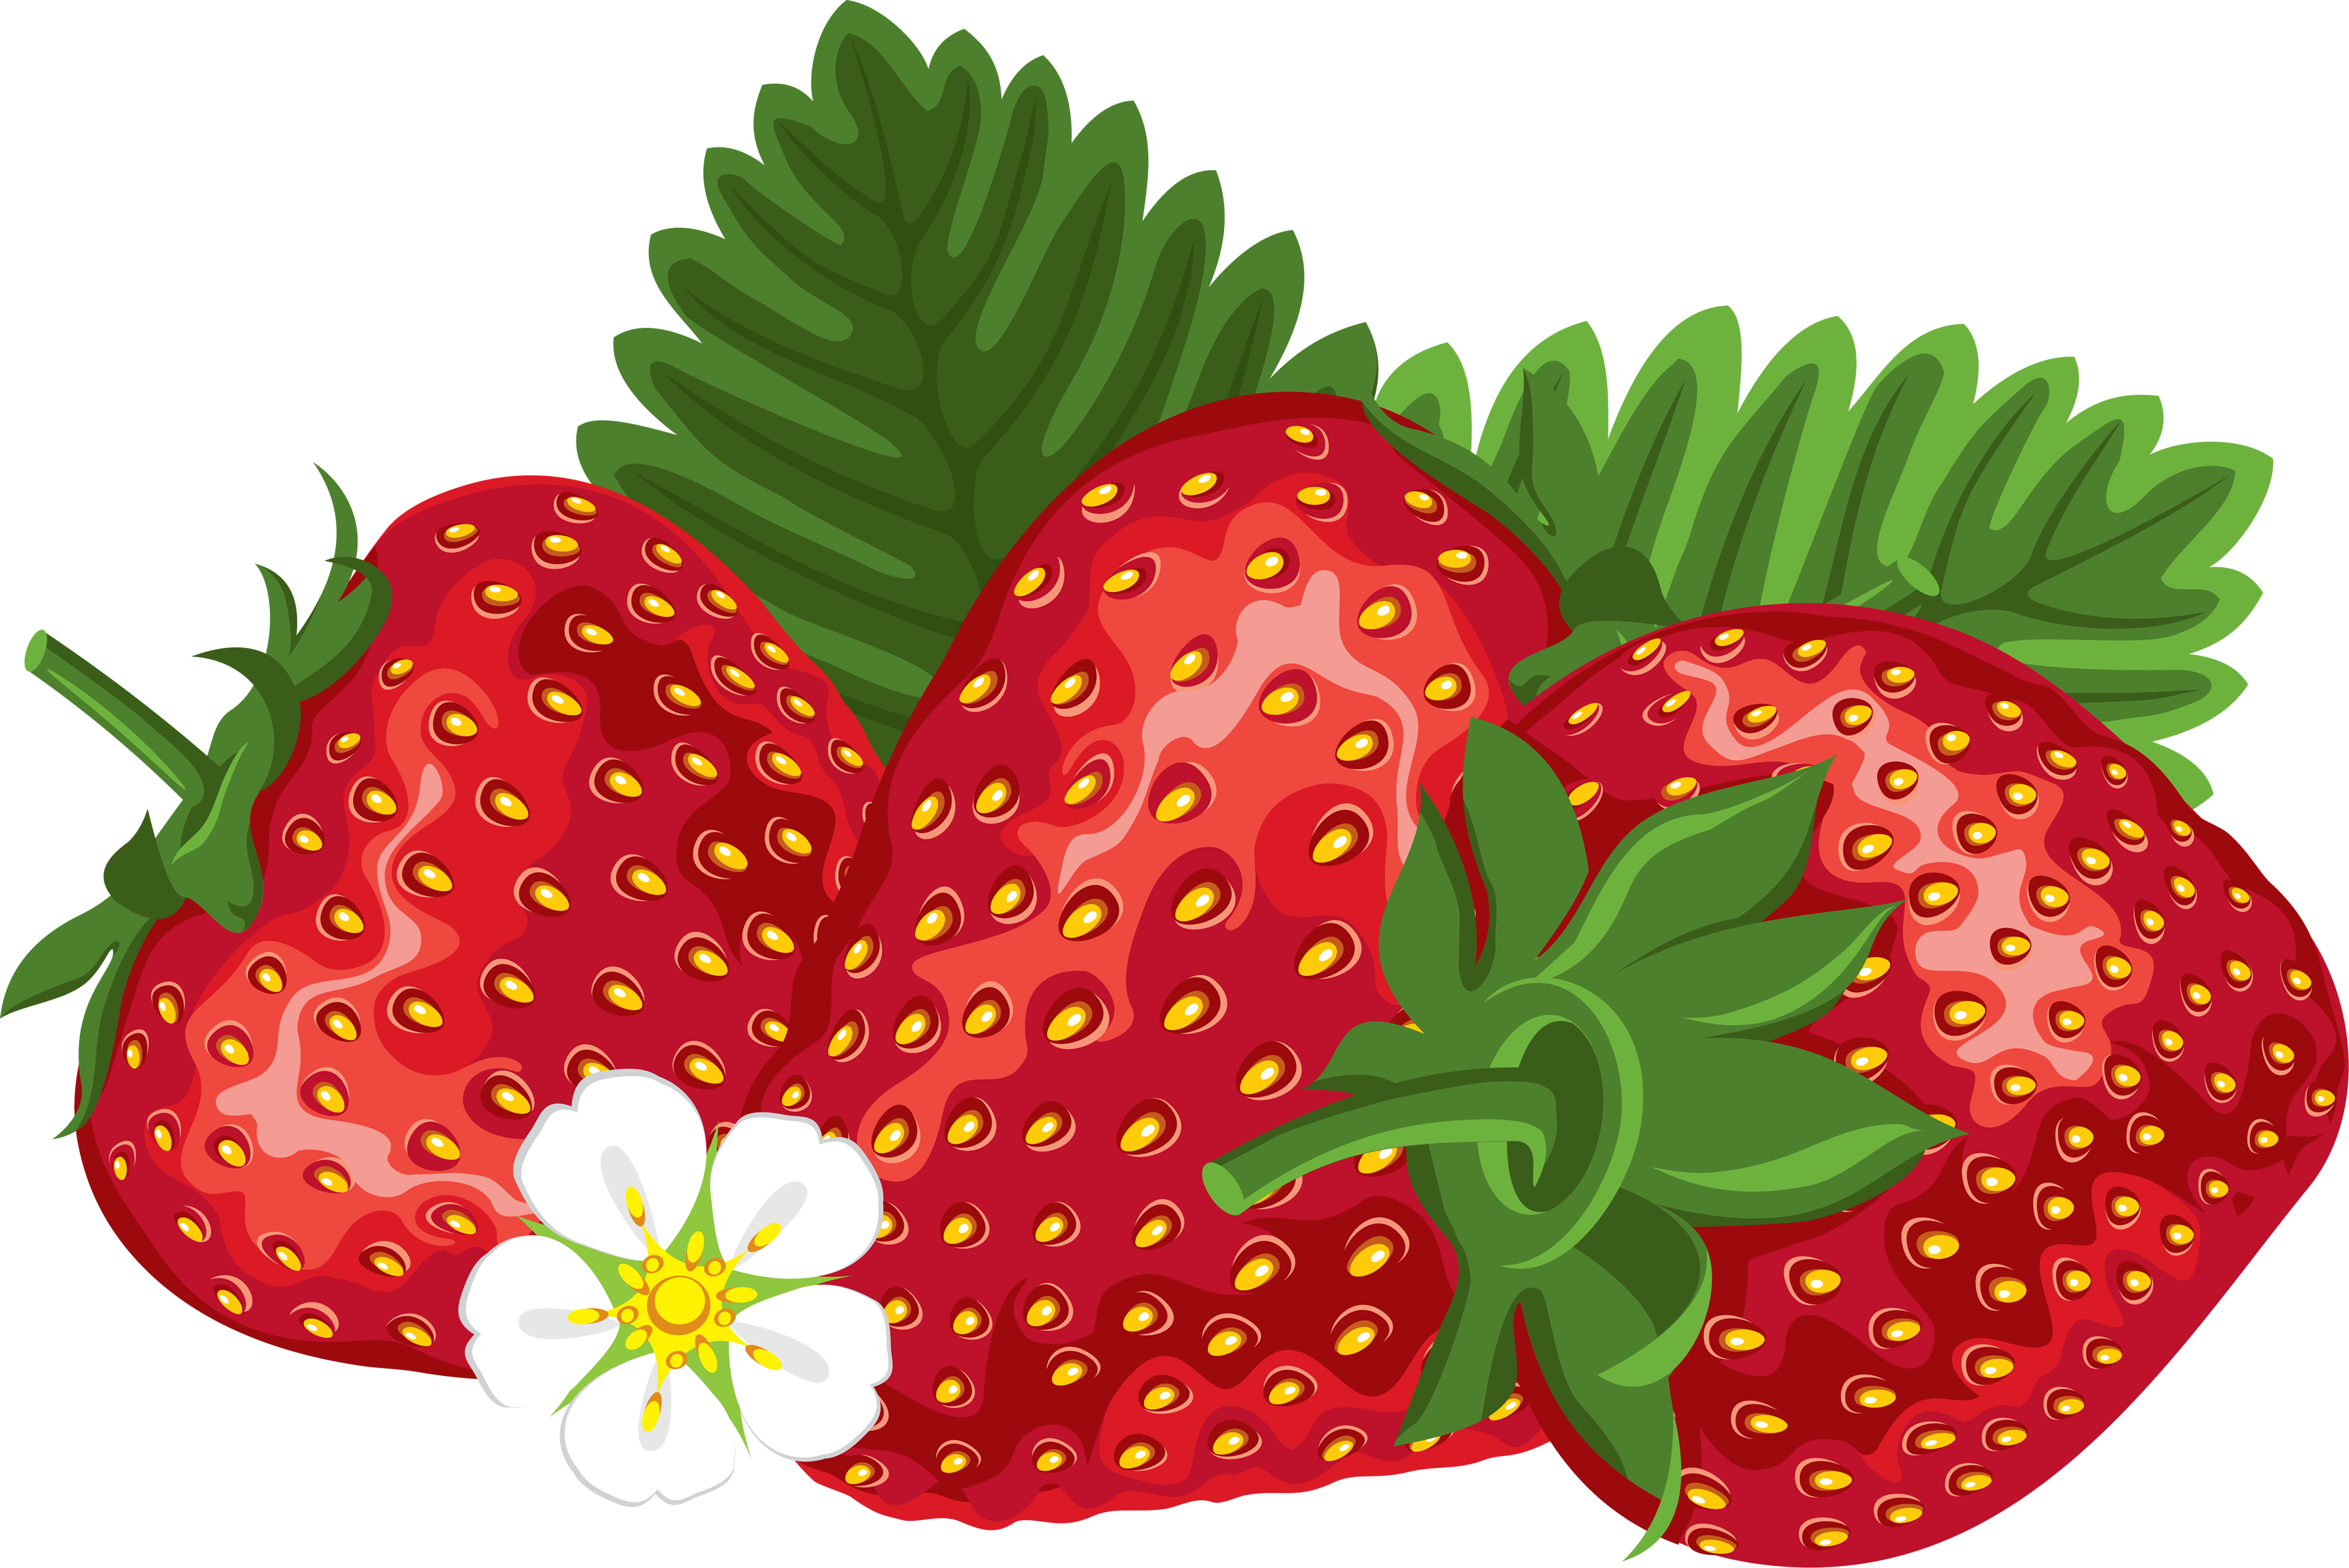 Strawberry Farmer Strawberries Images Image Free Download Png Clipart